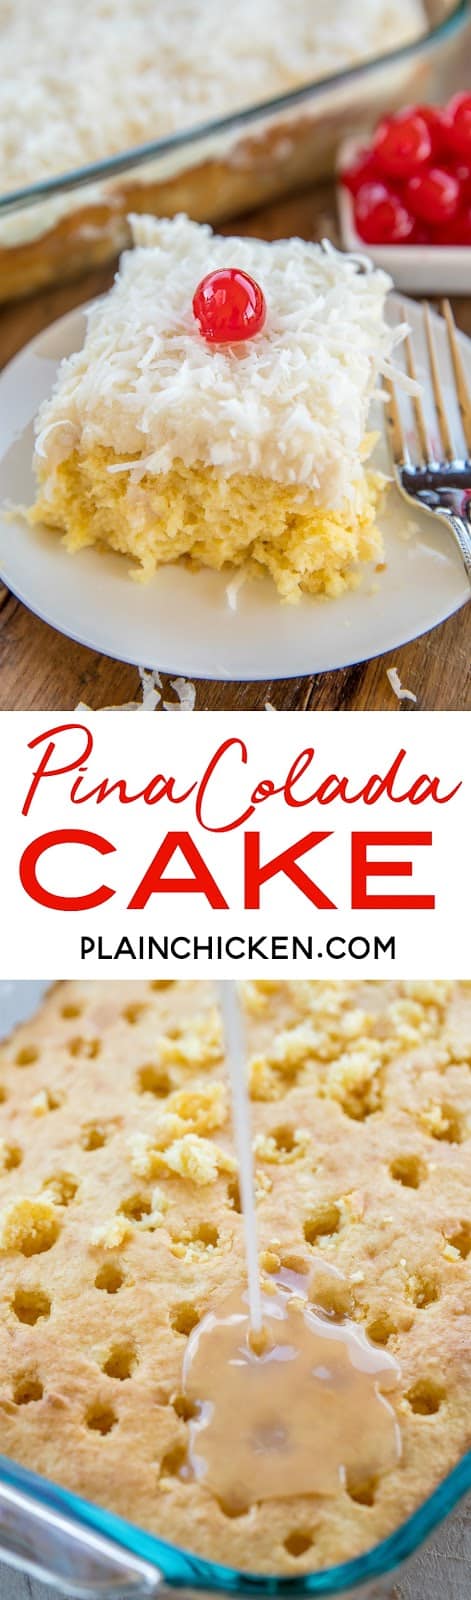 Pina Colada Poke Cake - cake loaded with coconut, pineapple and rum. This cake is SO good!! It gets better as it sits in the refrigerator. Pineapple cake topped with homemade cream cheese frosting and coconut! Golden Butter Cake Mix, oil, eggs, crushed pineapple, sour cream, rum extract, cream of coconut, cream cheese, milk, powdered sugar, coconut. Great for parties and potlucks. There are NEVER any leftovers!! SO good!! #cake #pinacolada #pokecake